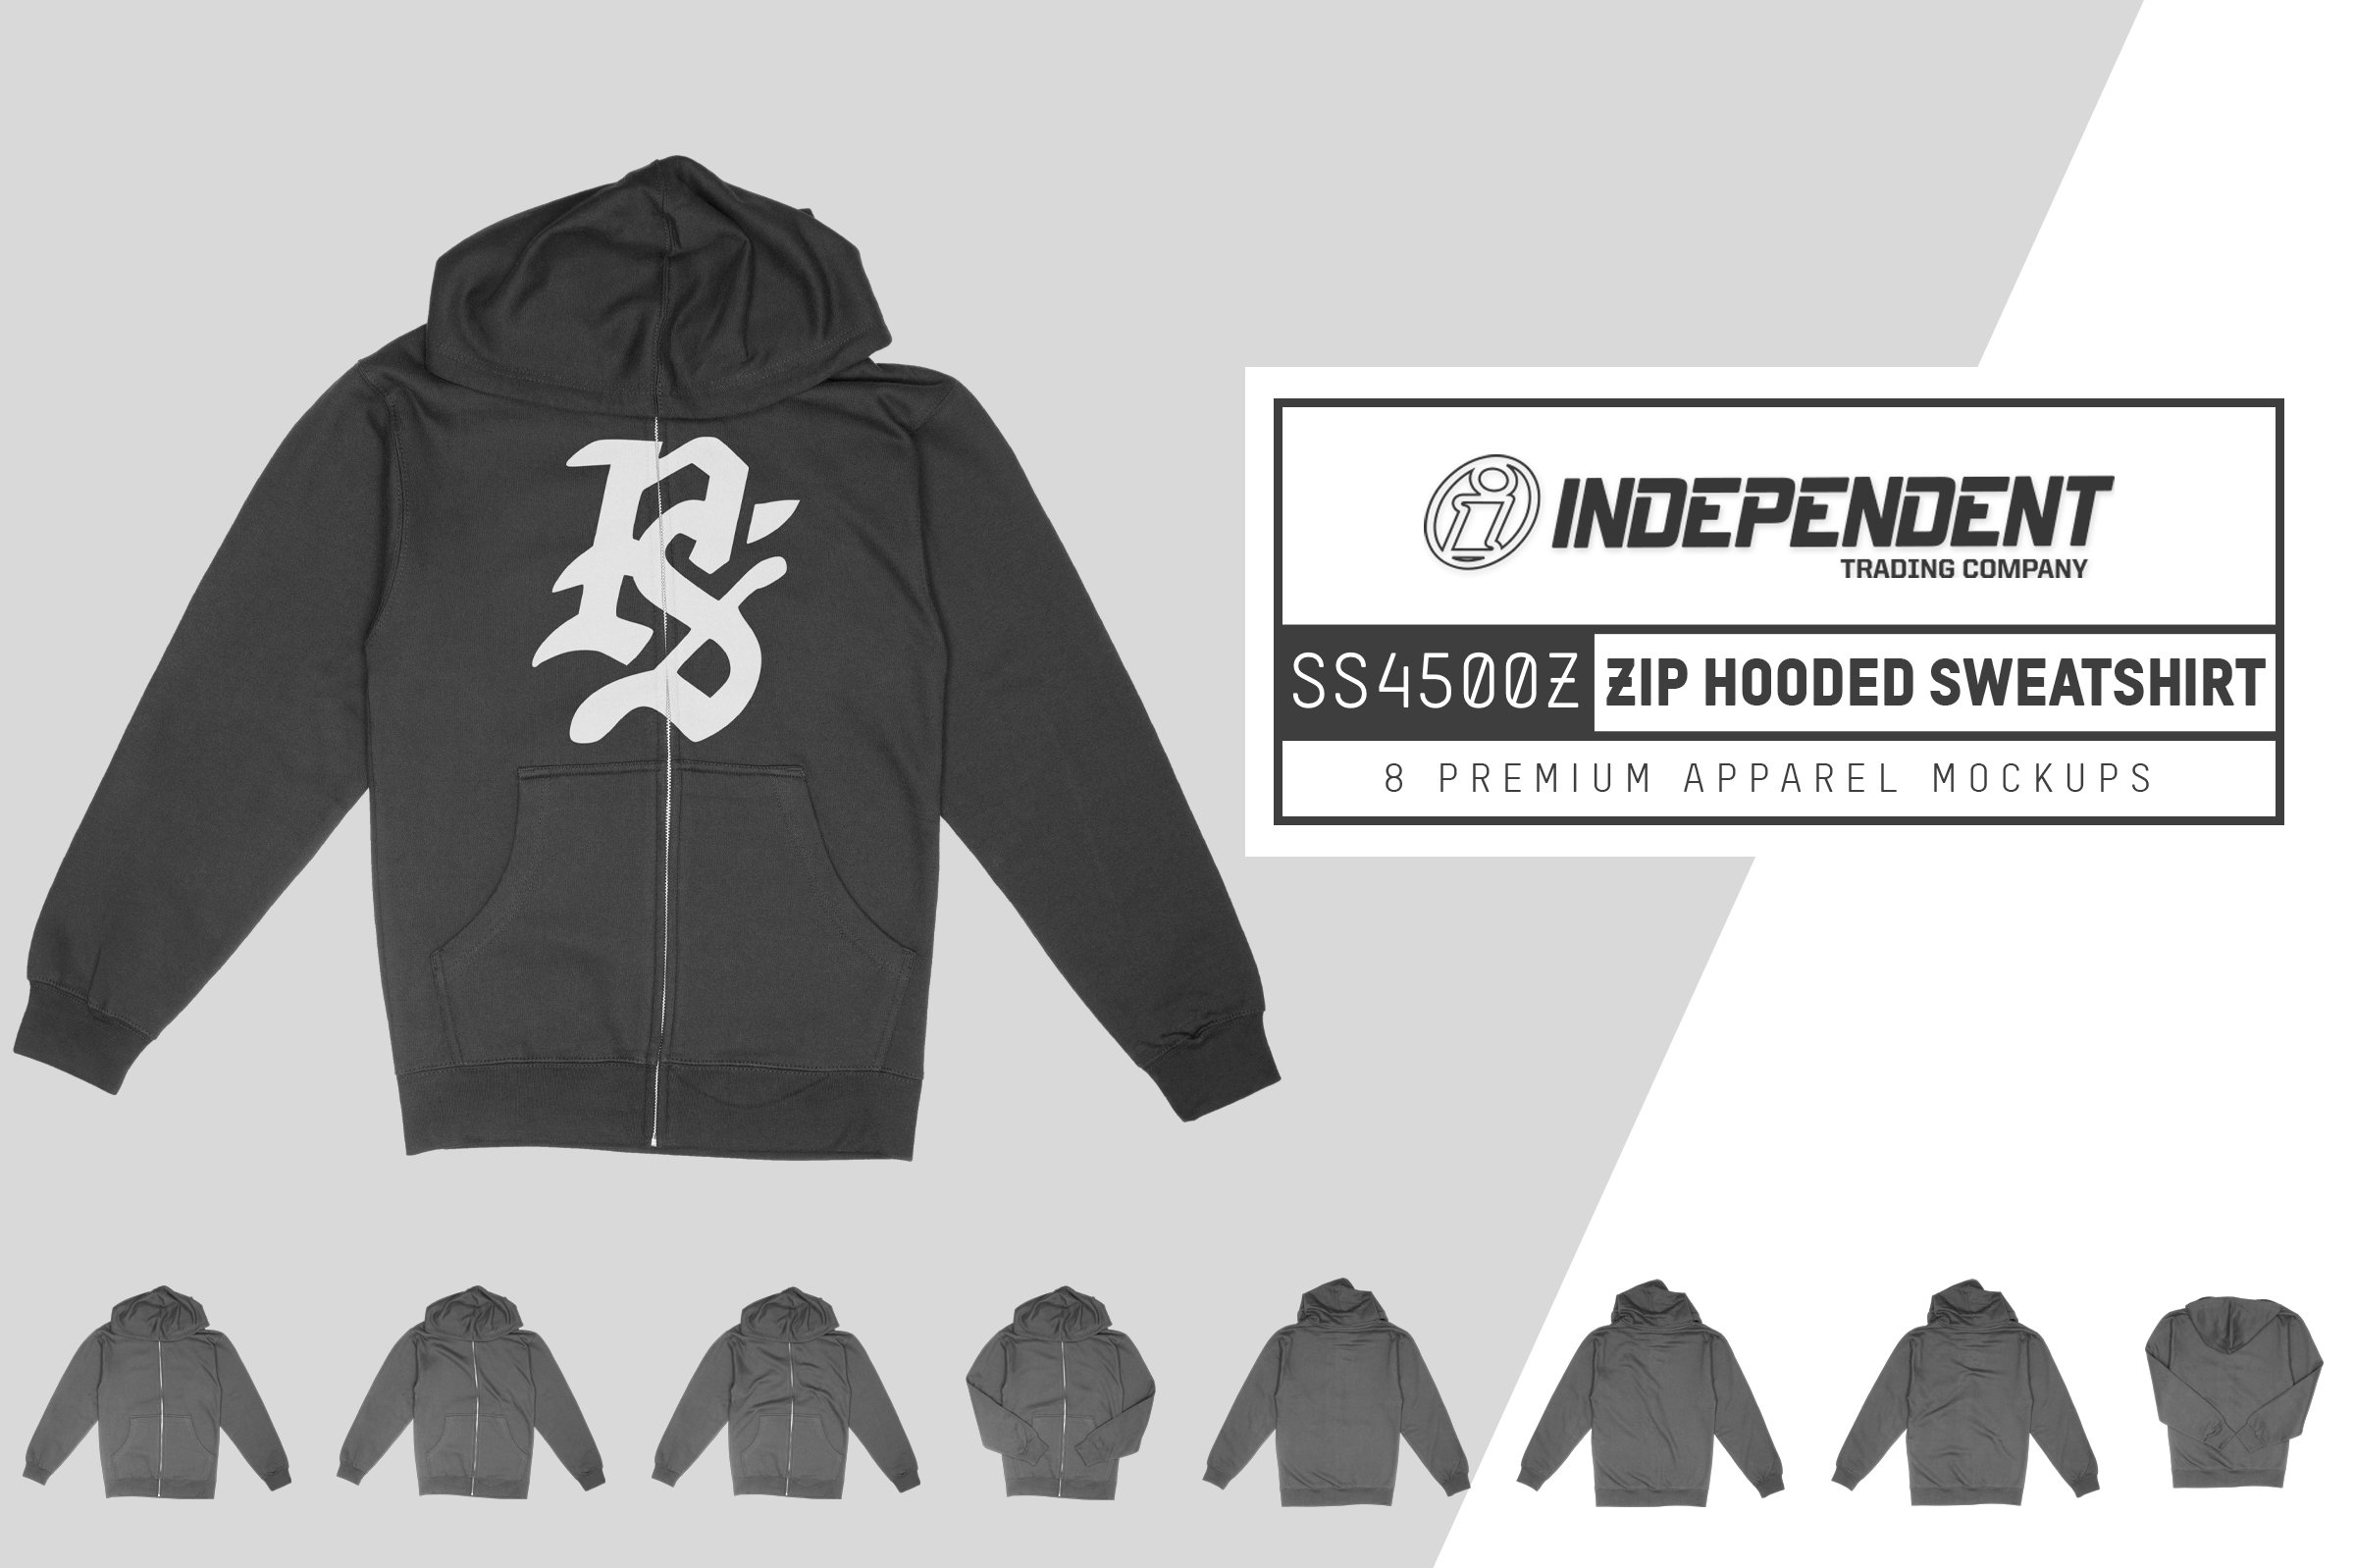 Independent SS4500Z Zip Up Hoodie cover image.